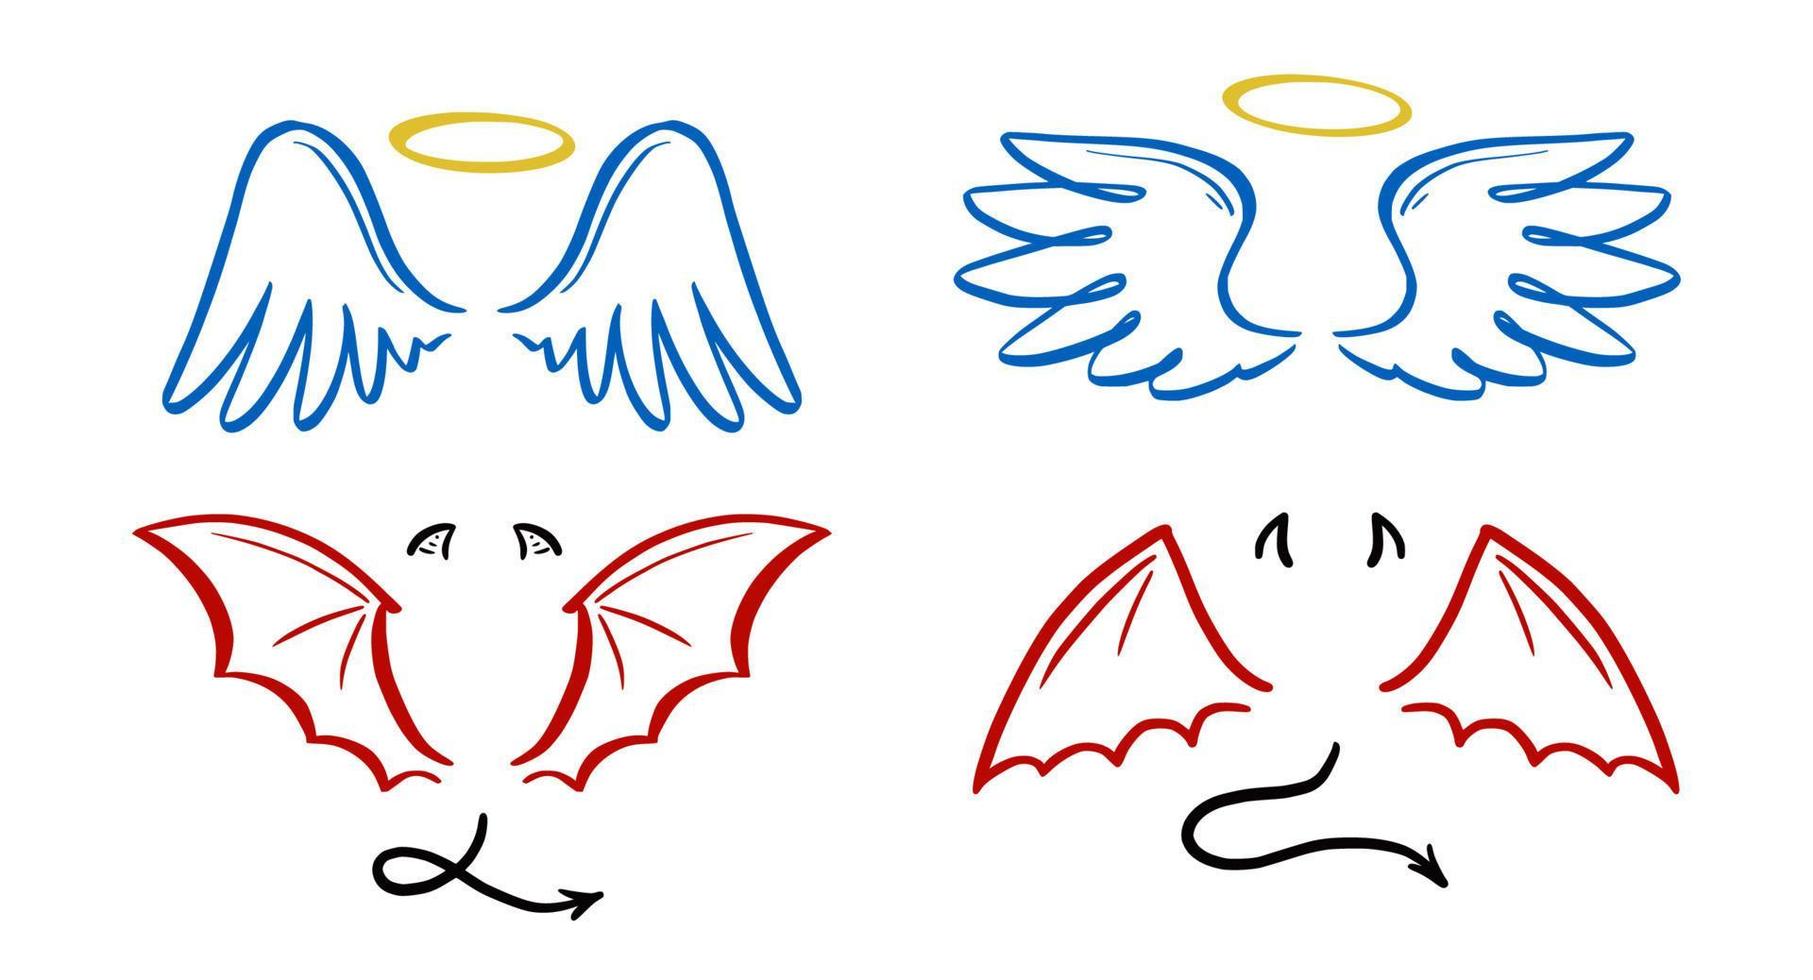 Angel and devil stylized vector illustration.